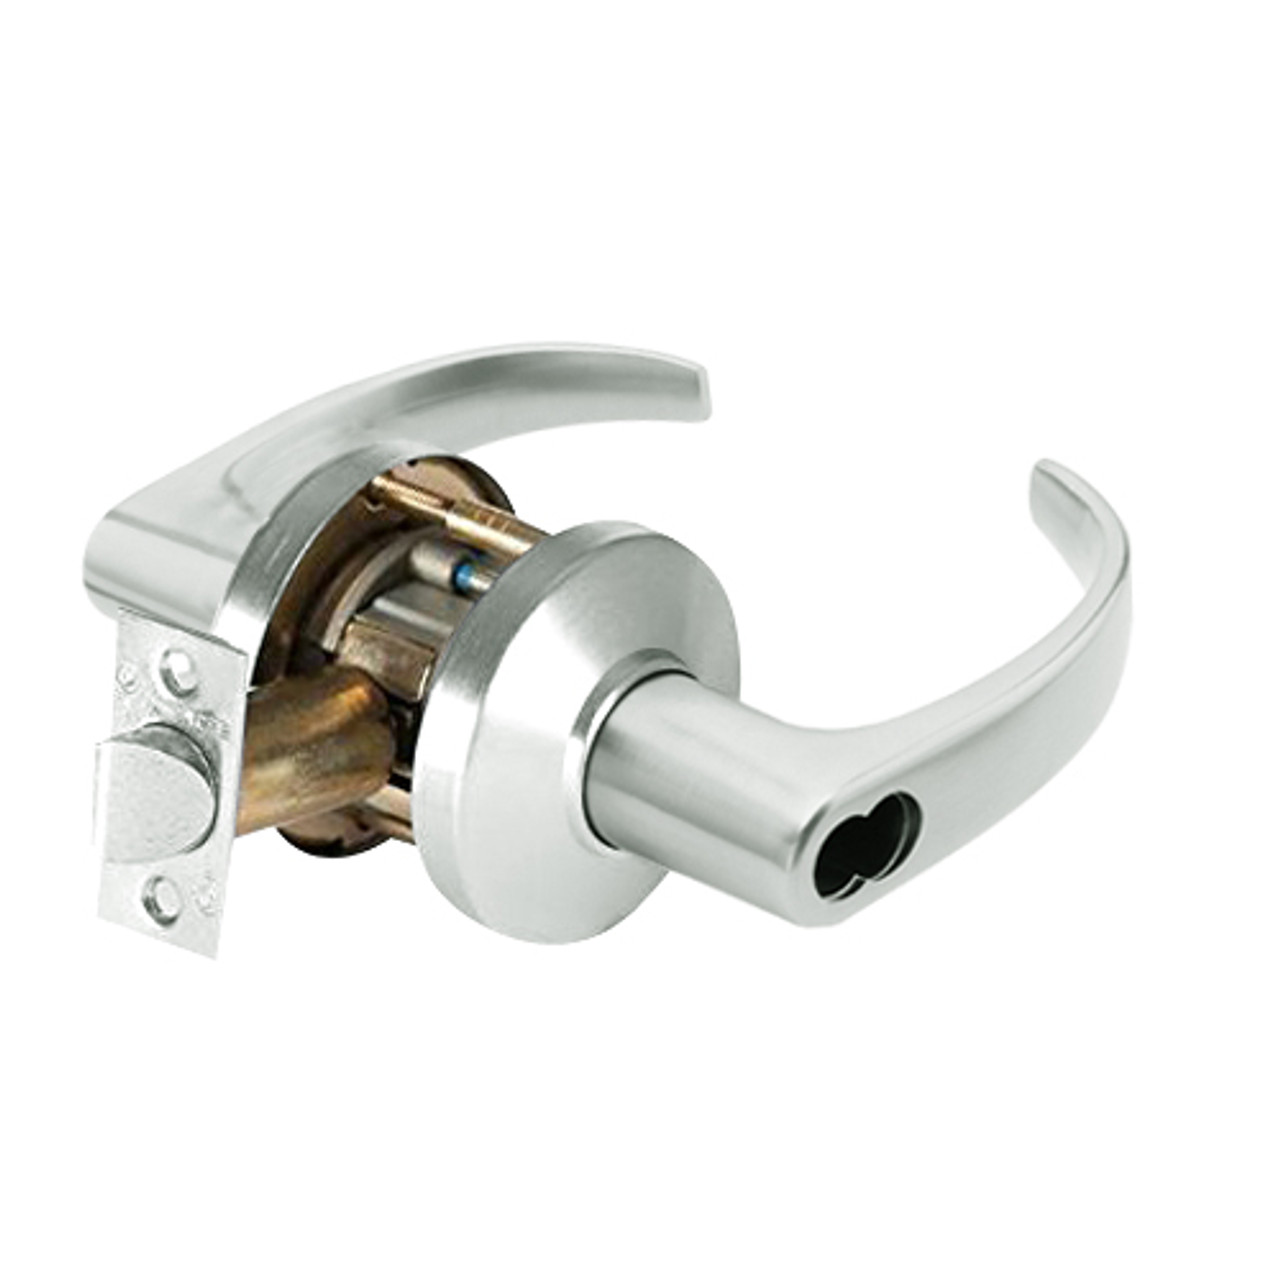 9K47W14CSTK618 Best 9K Series Institutional Cylindrical Lever Locks with Curved with Return Lever Design Accept 7 Pin Best Core in Bright Nickel